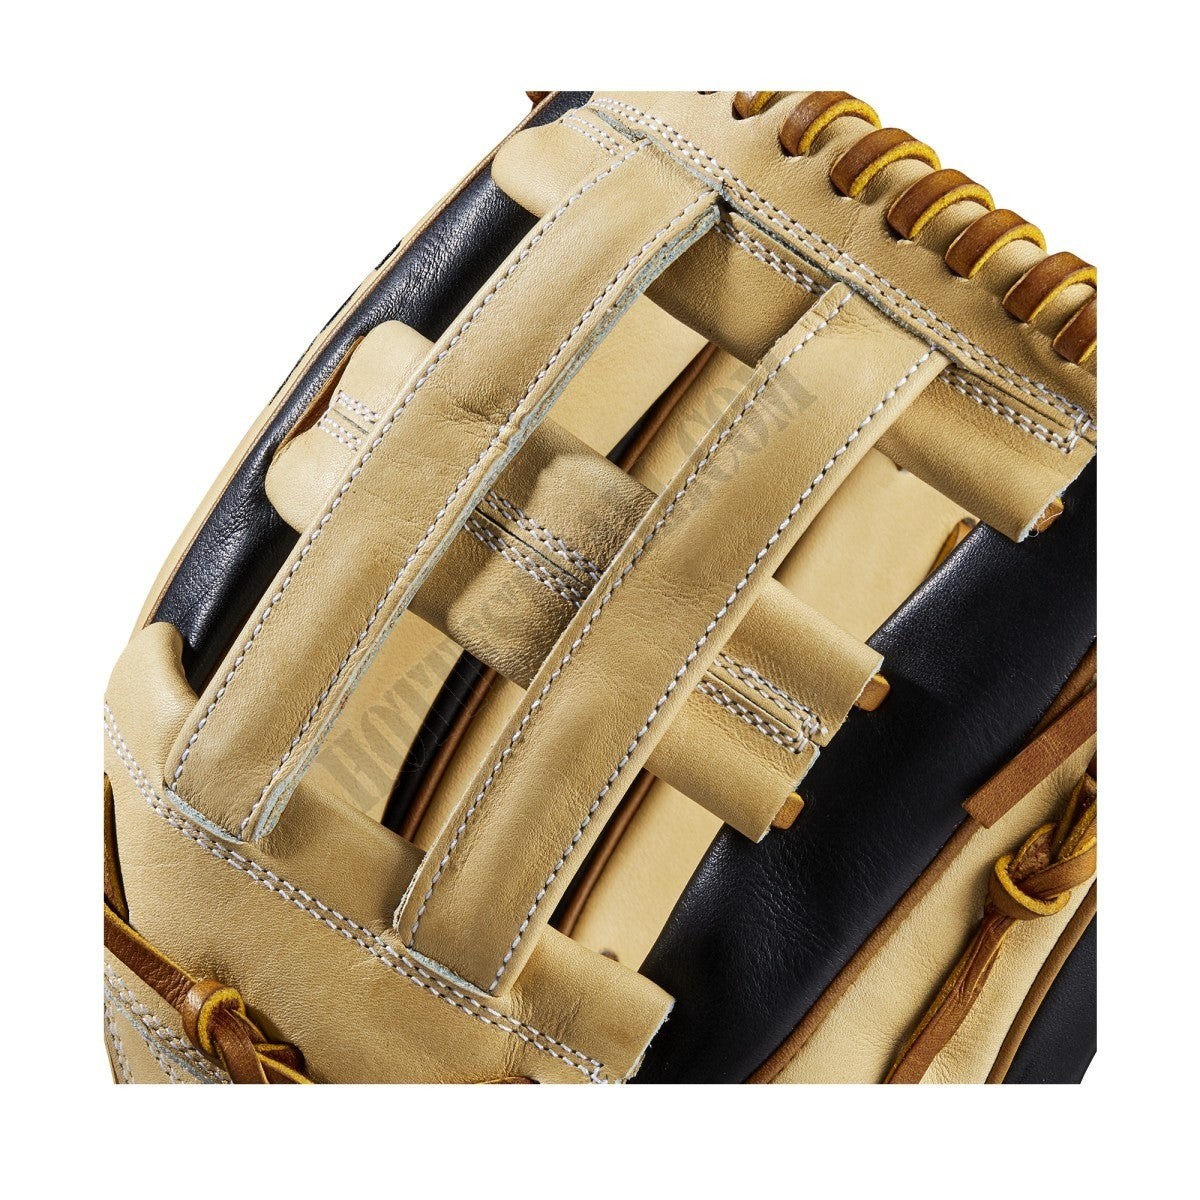 2020 A2K 1799 12.75" Outfield Baseball Glove ● Wilson Promotions - -5